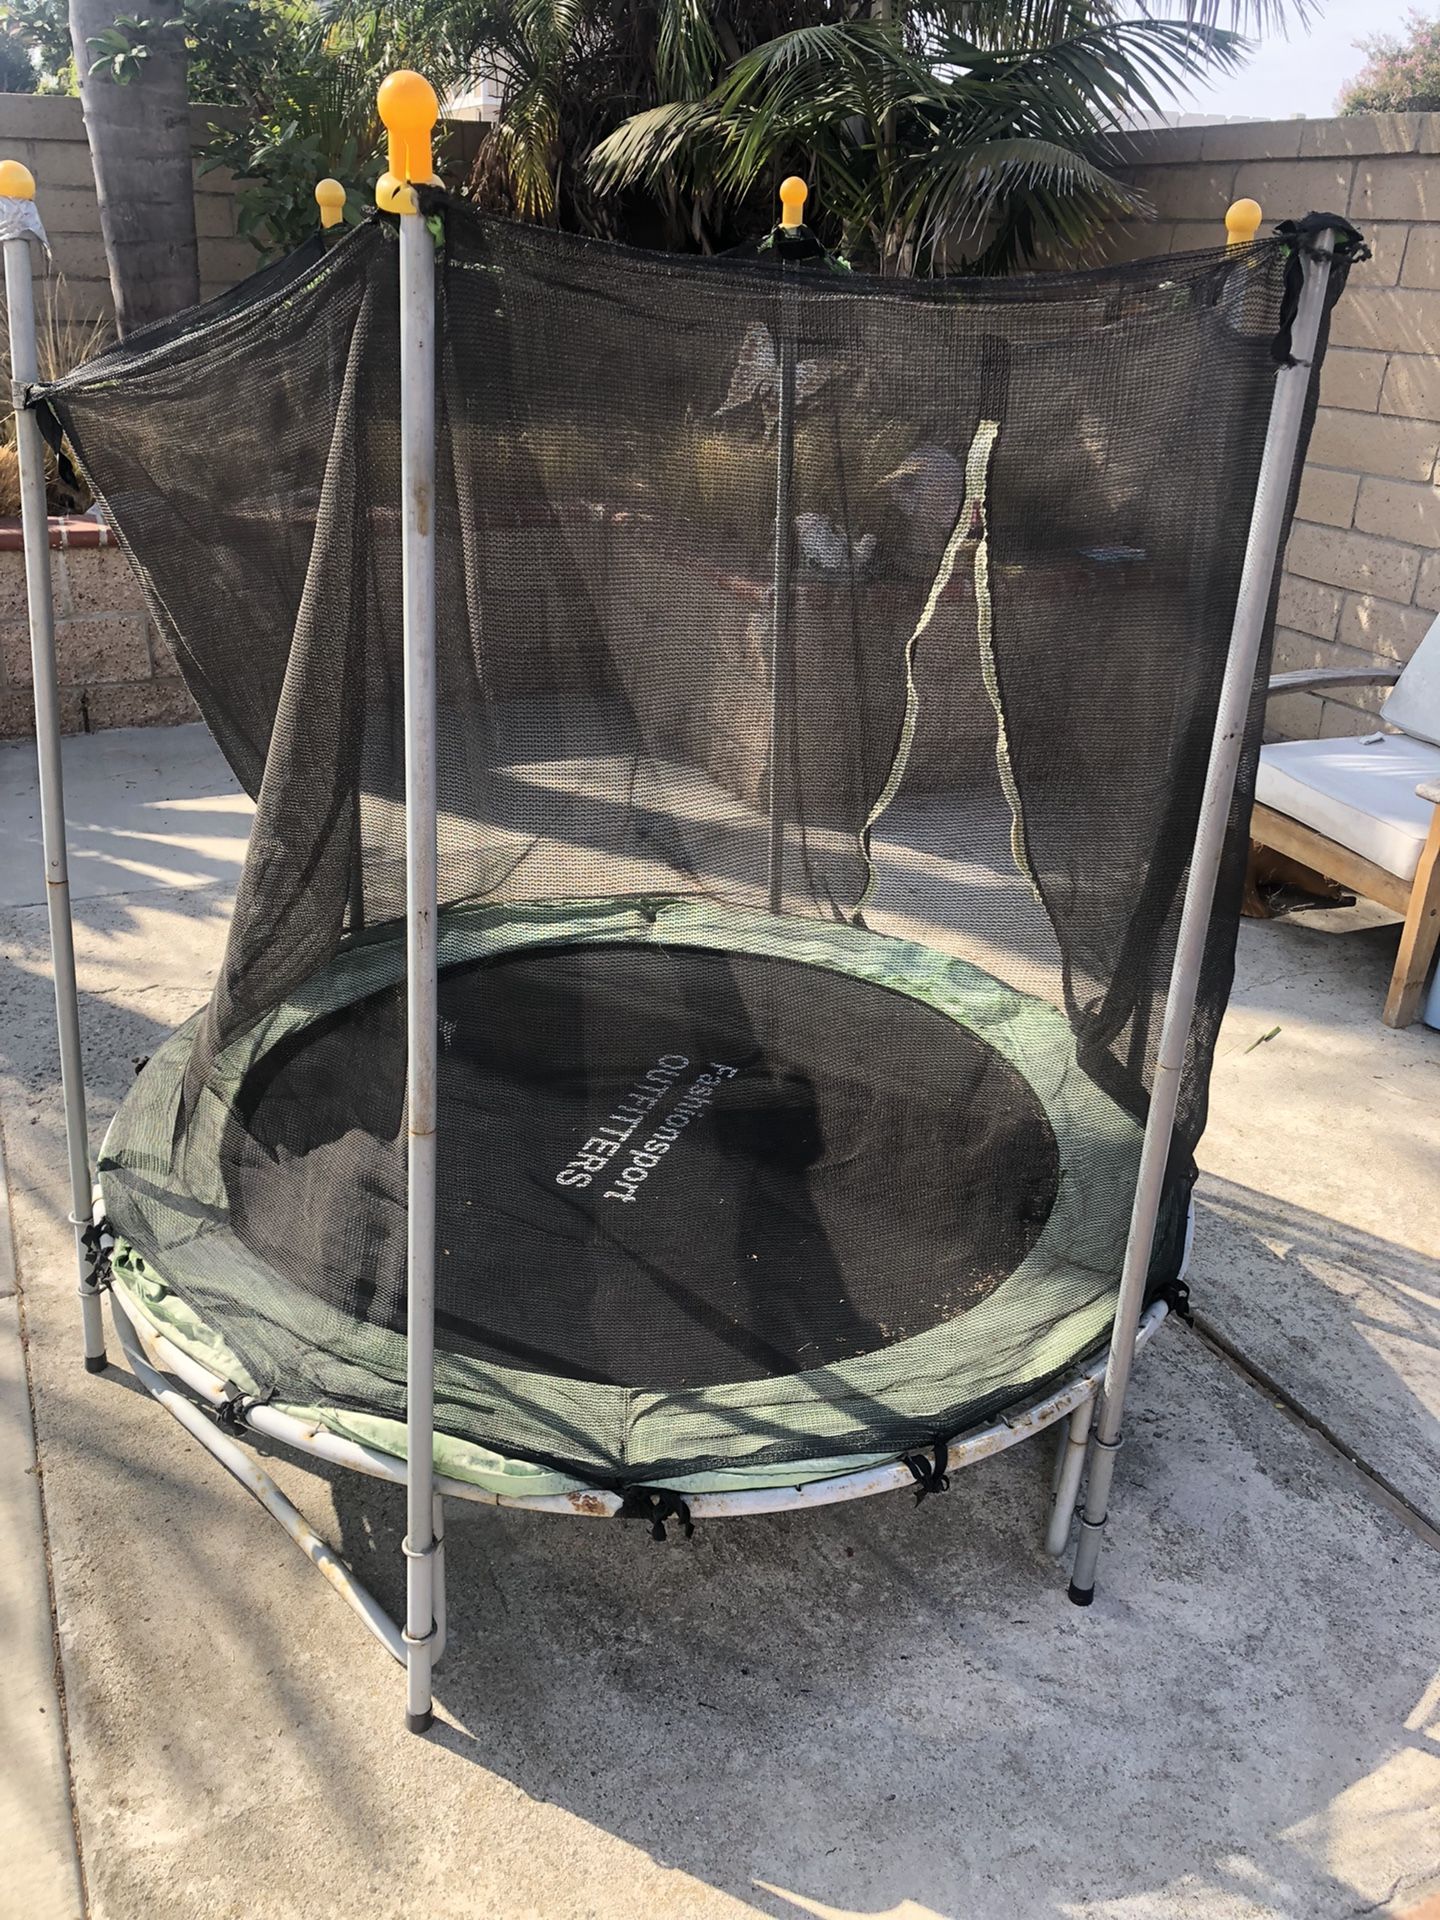  (5.5 Feet Across) Trampoline Medium Size With Safety Net - Black trampoline part is like new and bounces perfect 👍🏻 👌🏼